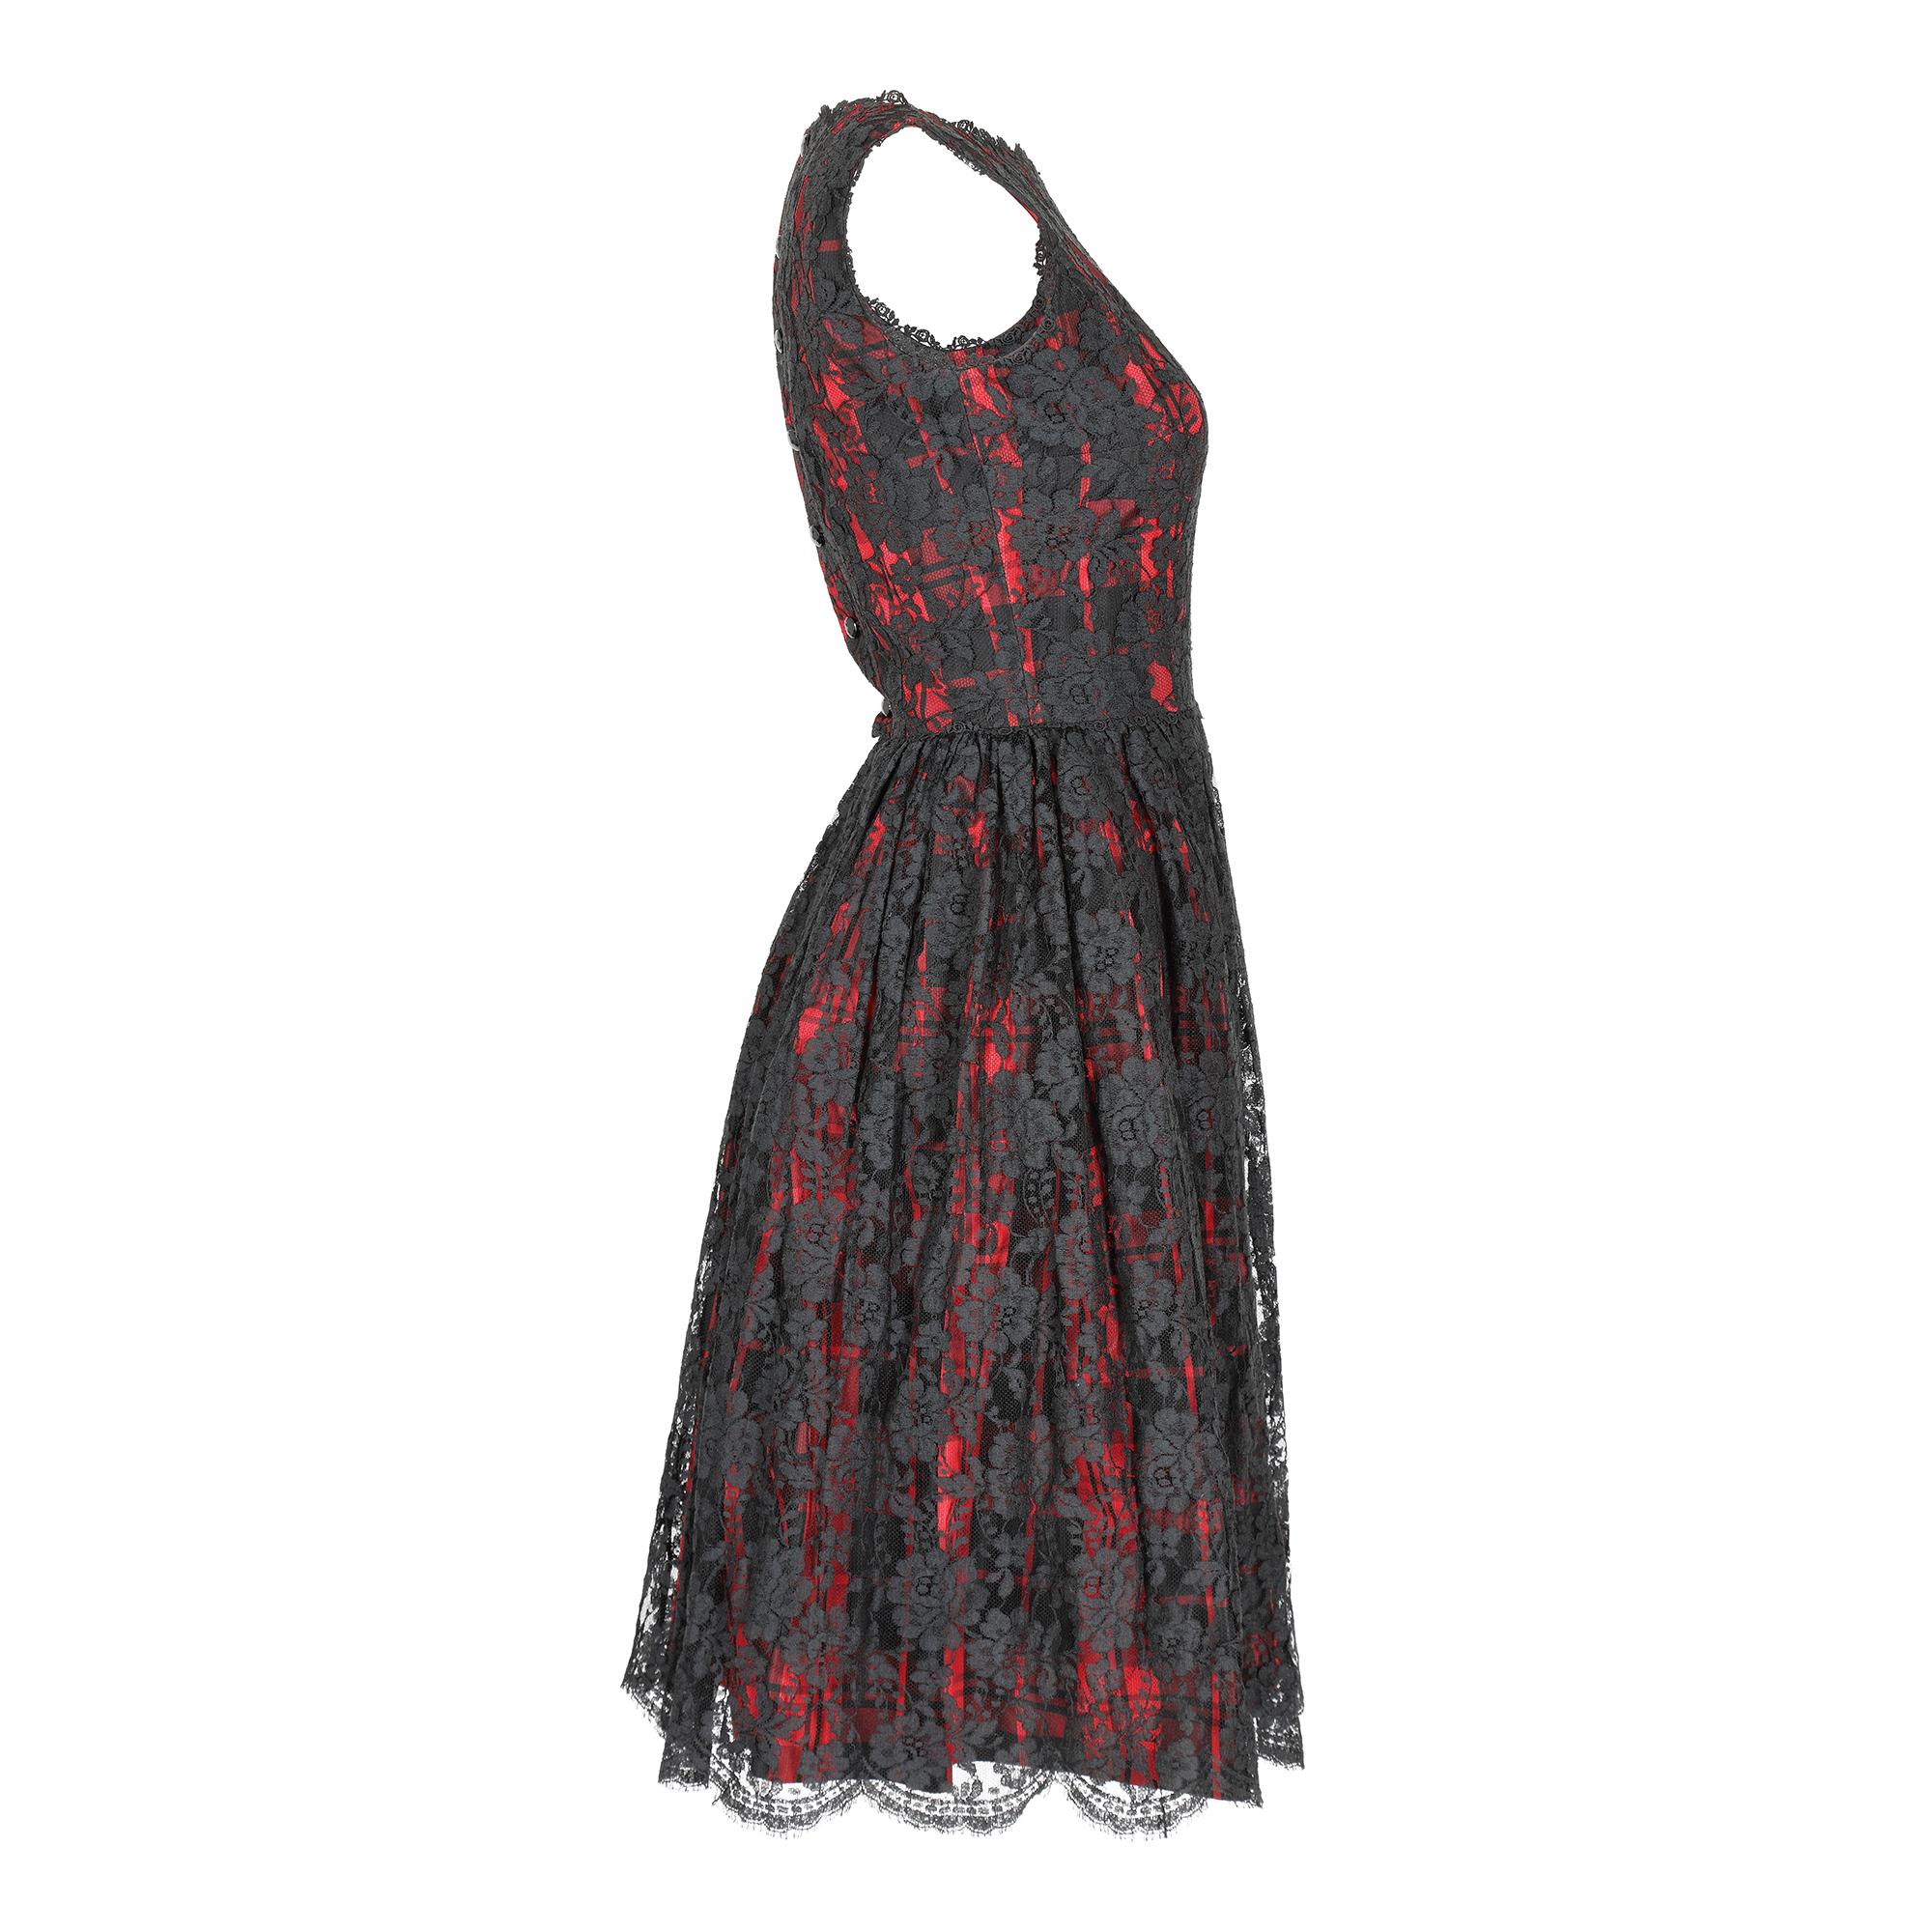 A beautiful vintage evening dress that can be exactly dated to 1962 by the label - Lang originals, which was a brand of the American fashion house Jean Lang and founded in 1916. The dress is a lovely quality black and red plaid pattern in either